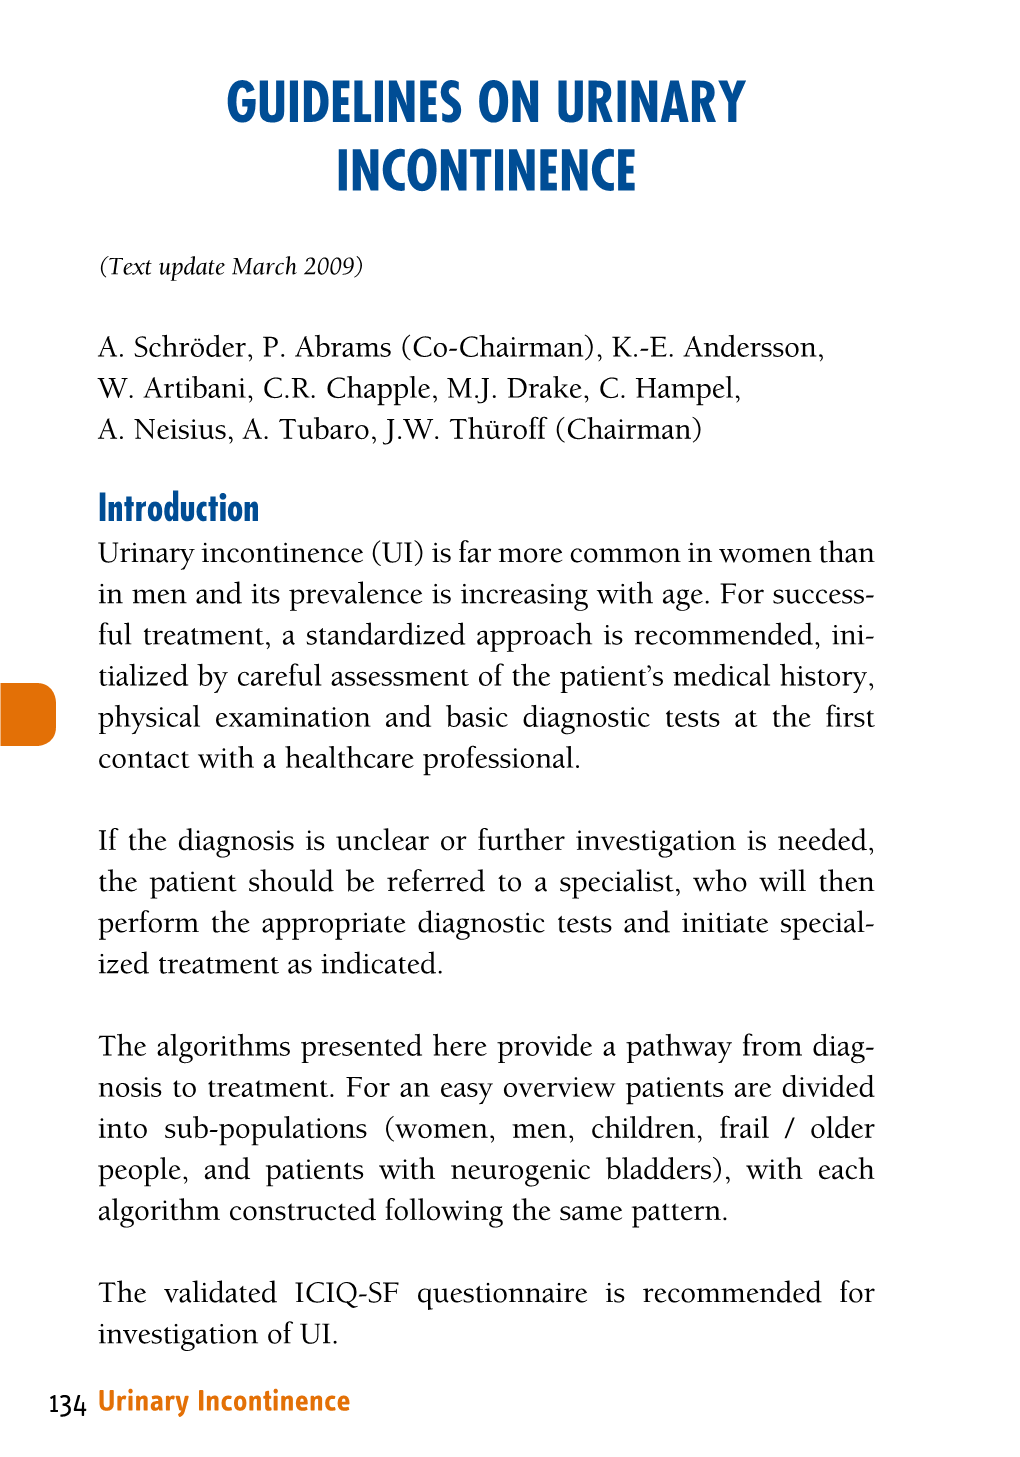 EAU Pocket Guidelines on Urinary Incontinence 2010